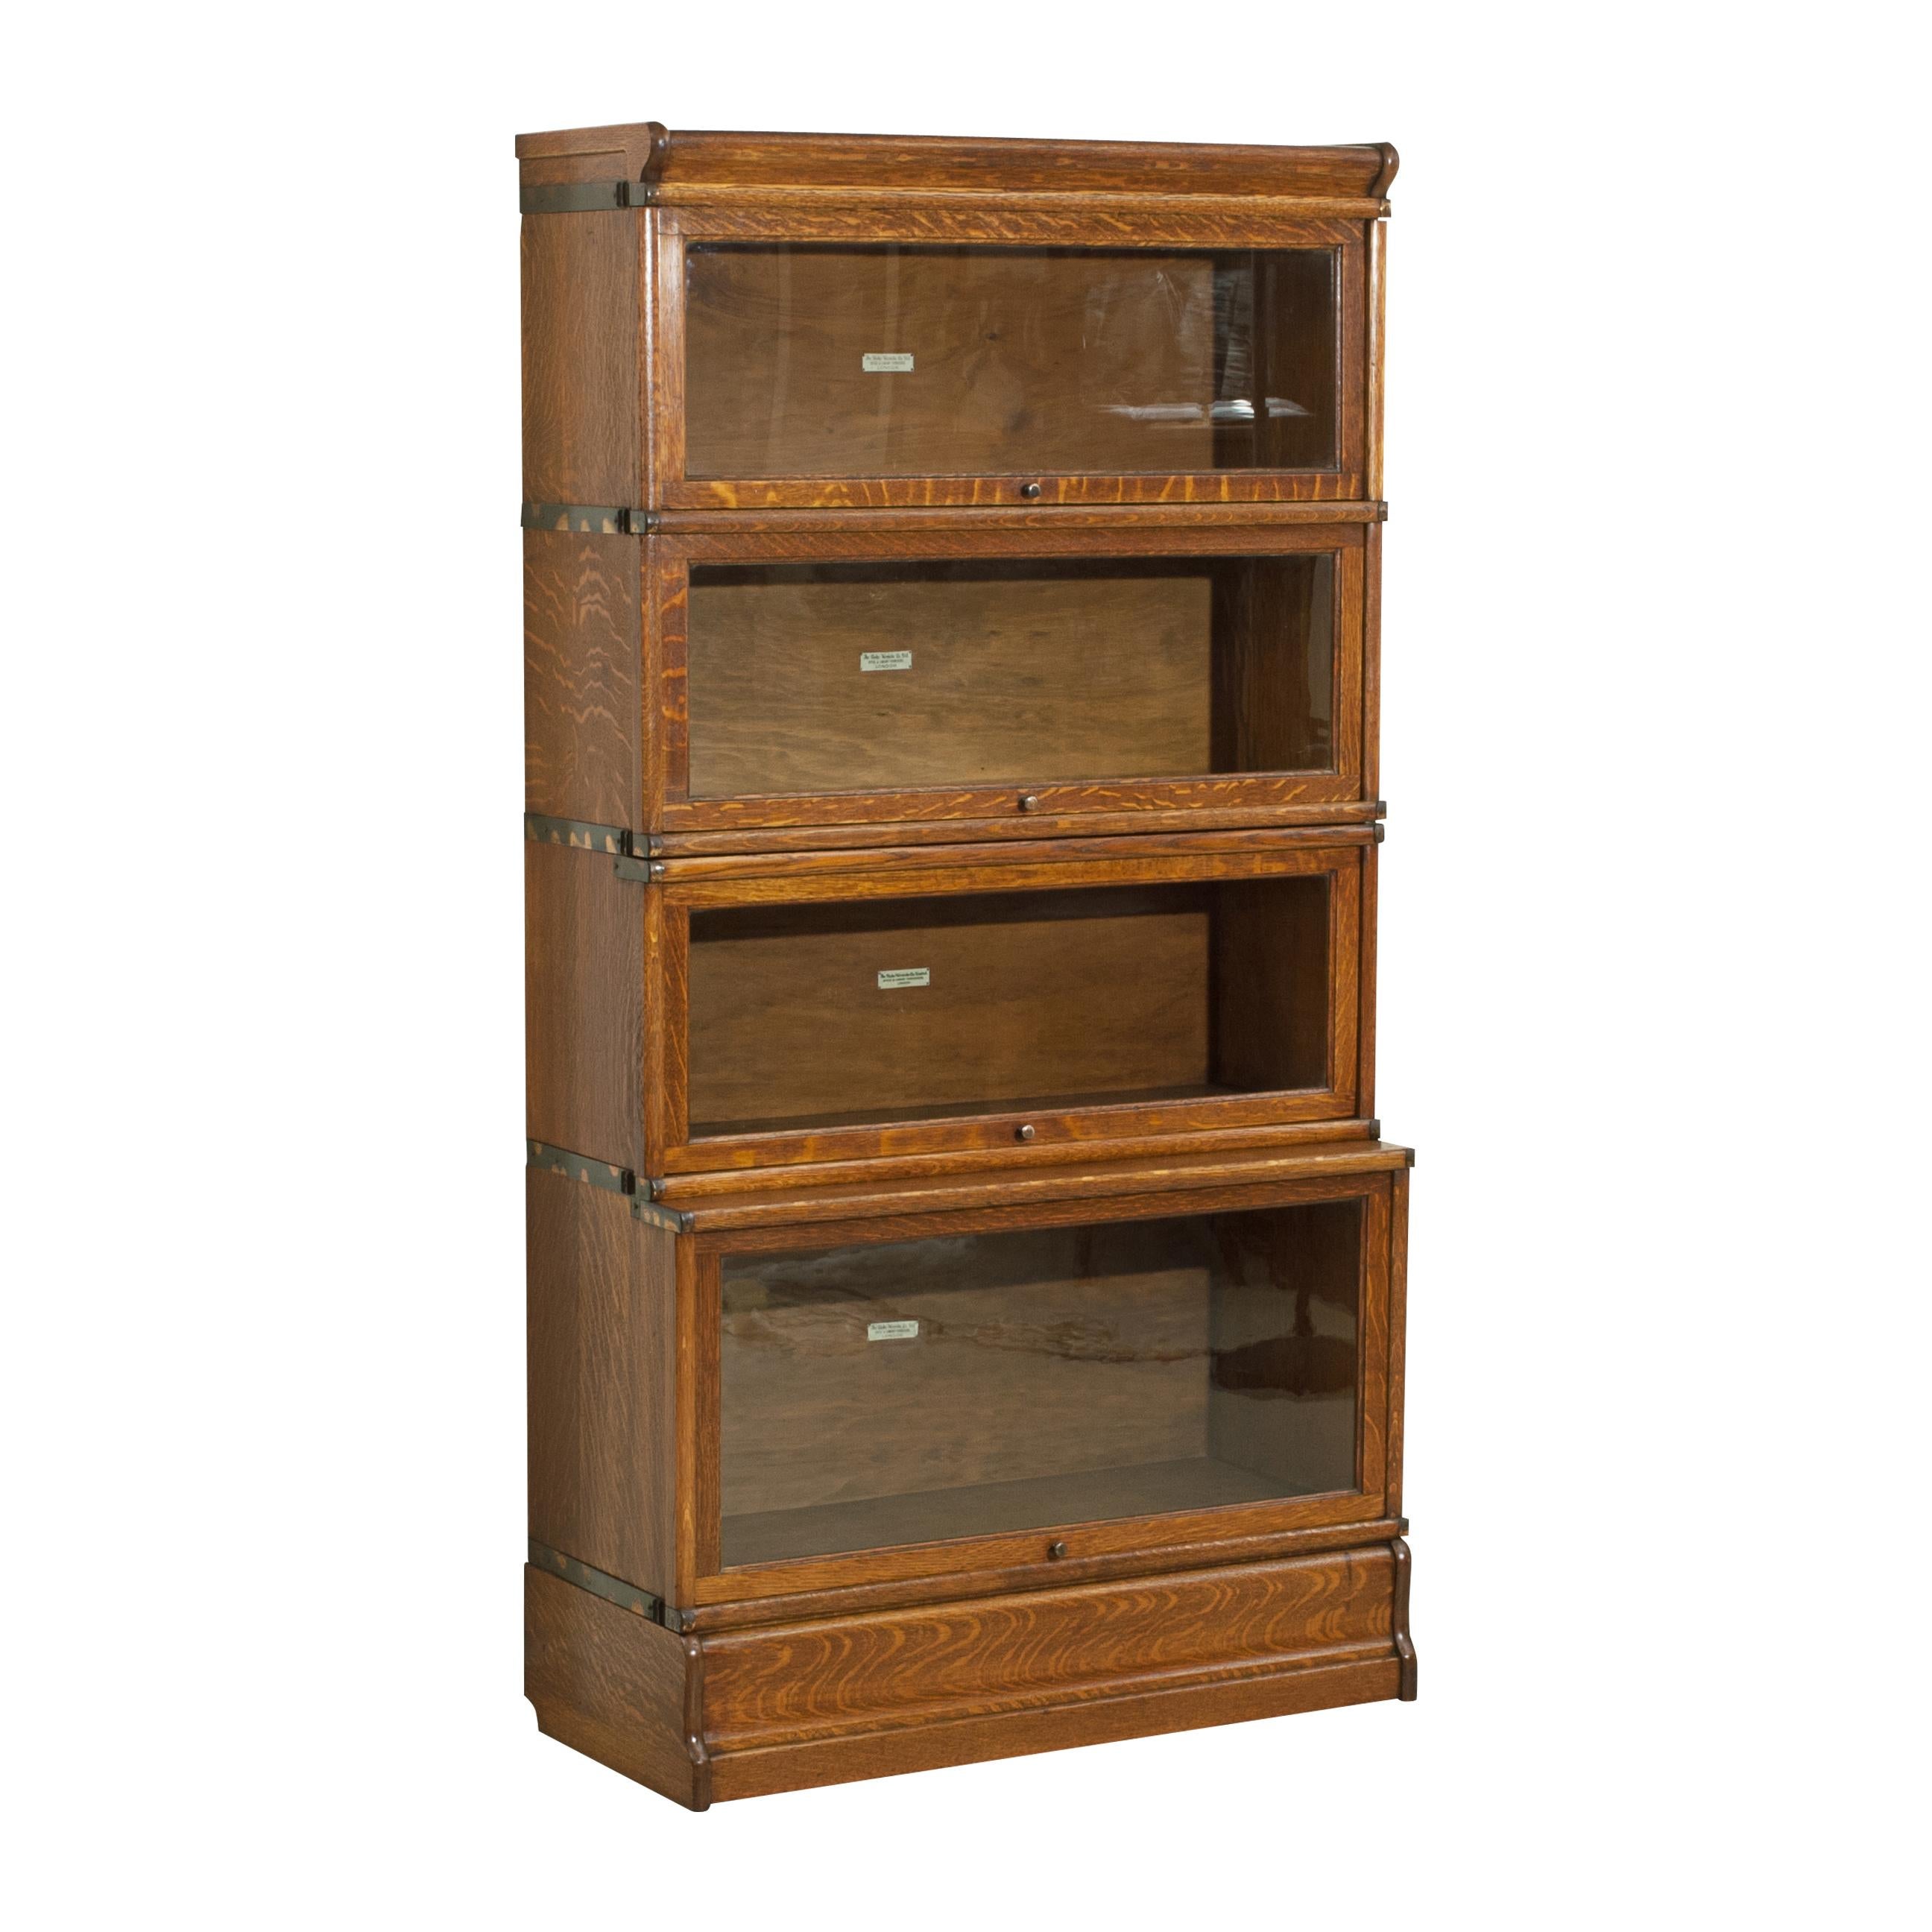 Antique Oak Globe Wernicke Bookcase with Glazed Doors in Four Sections